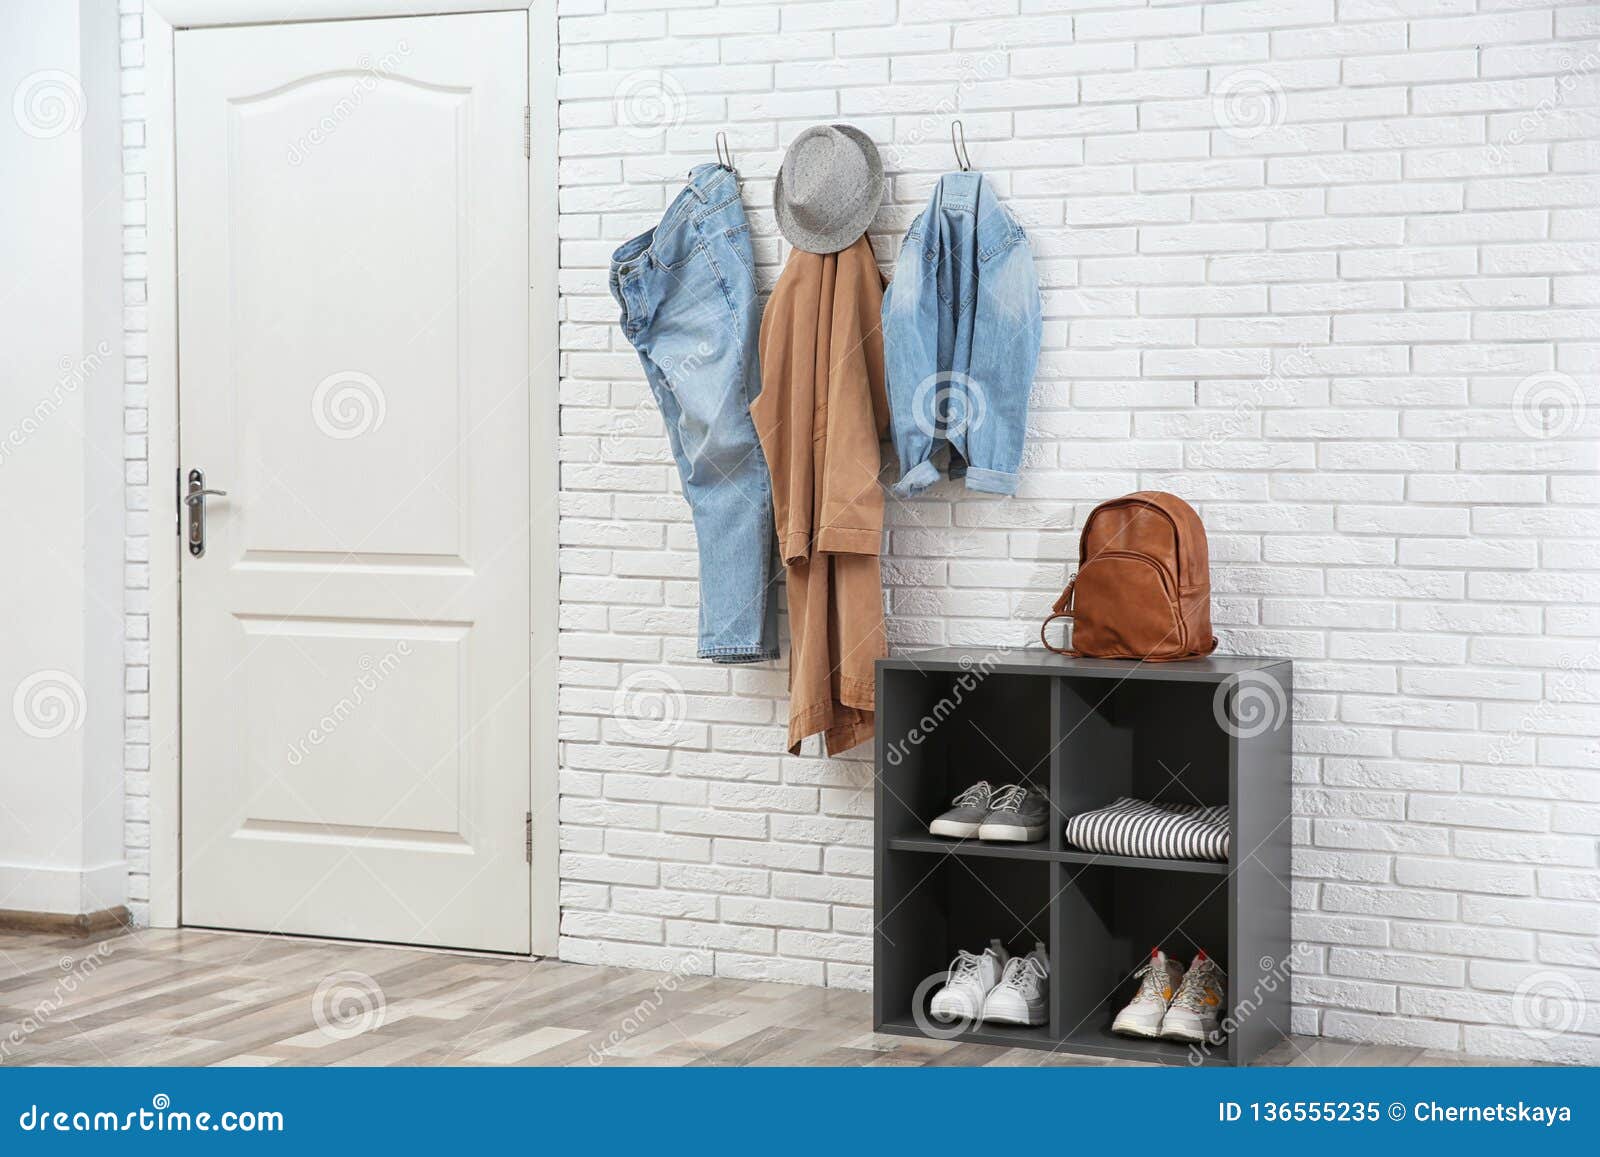 Stylish Hallway Interior With Door Shoe Rack And Clothes